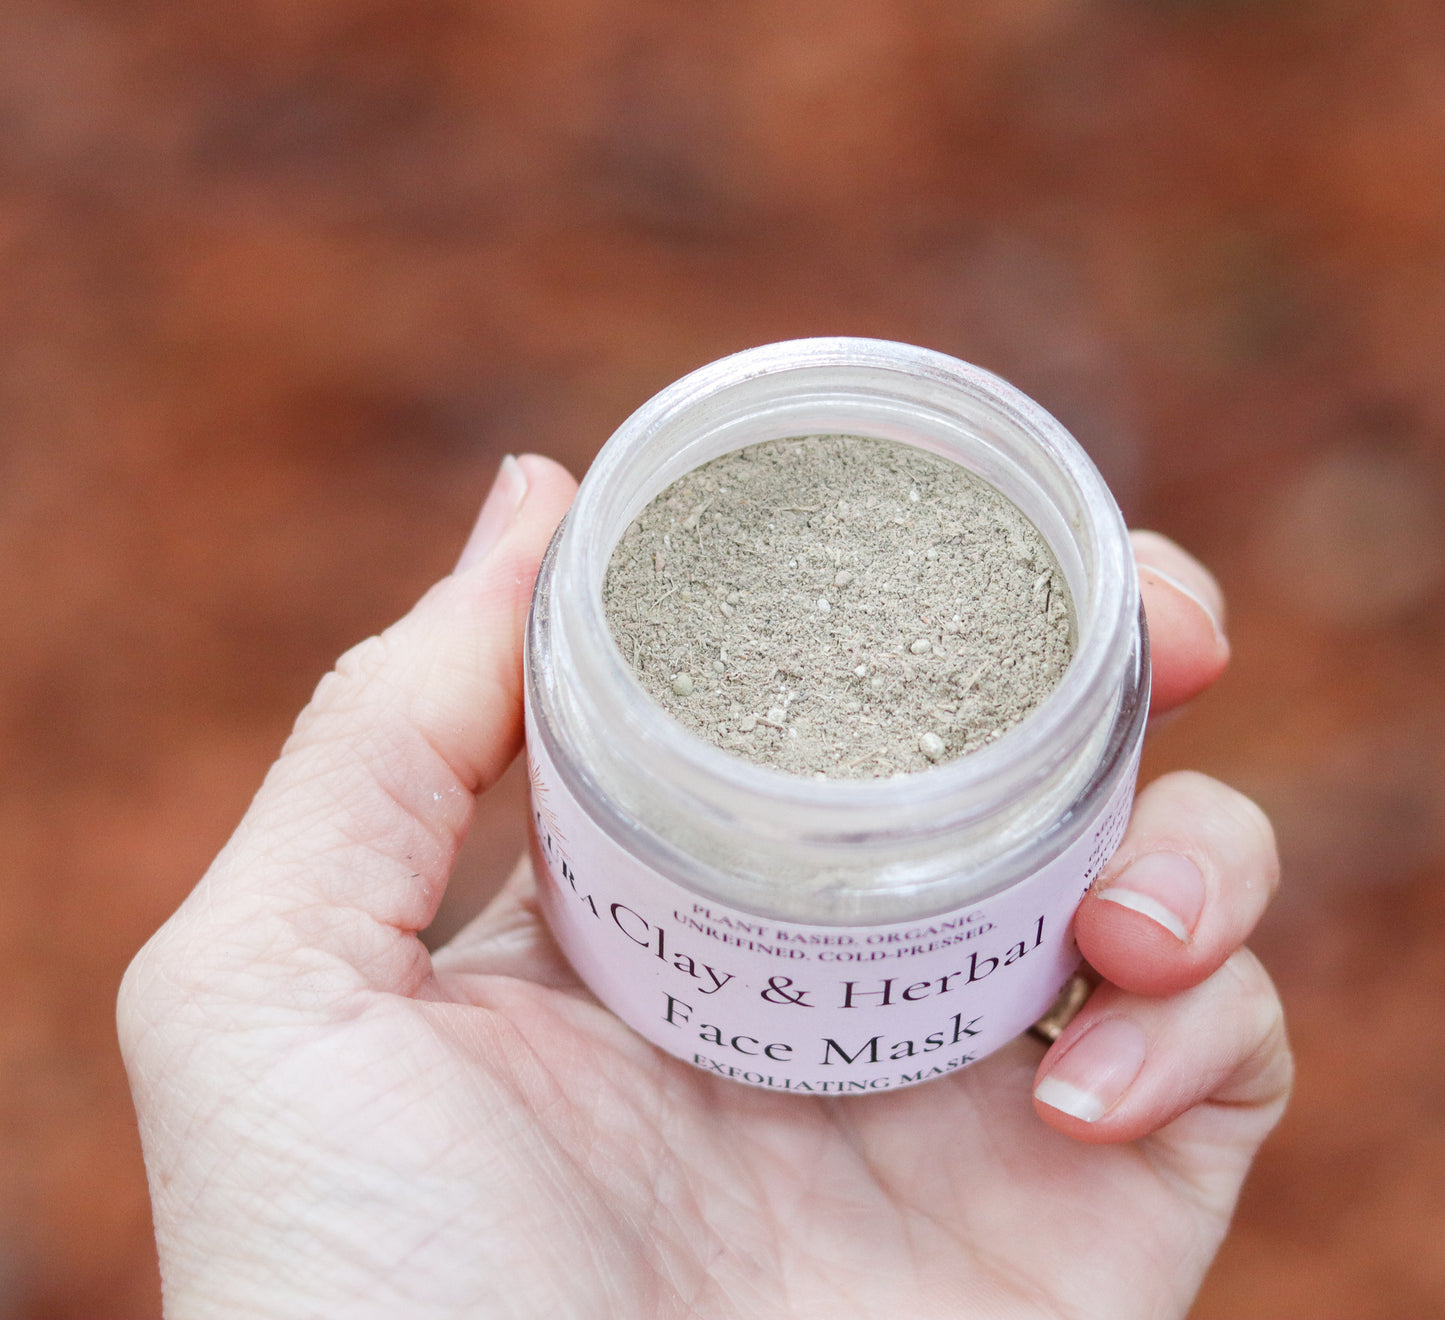 HERBS & CLAY FACE MASK - Exfoliating, Detoxing, Cleansing